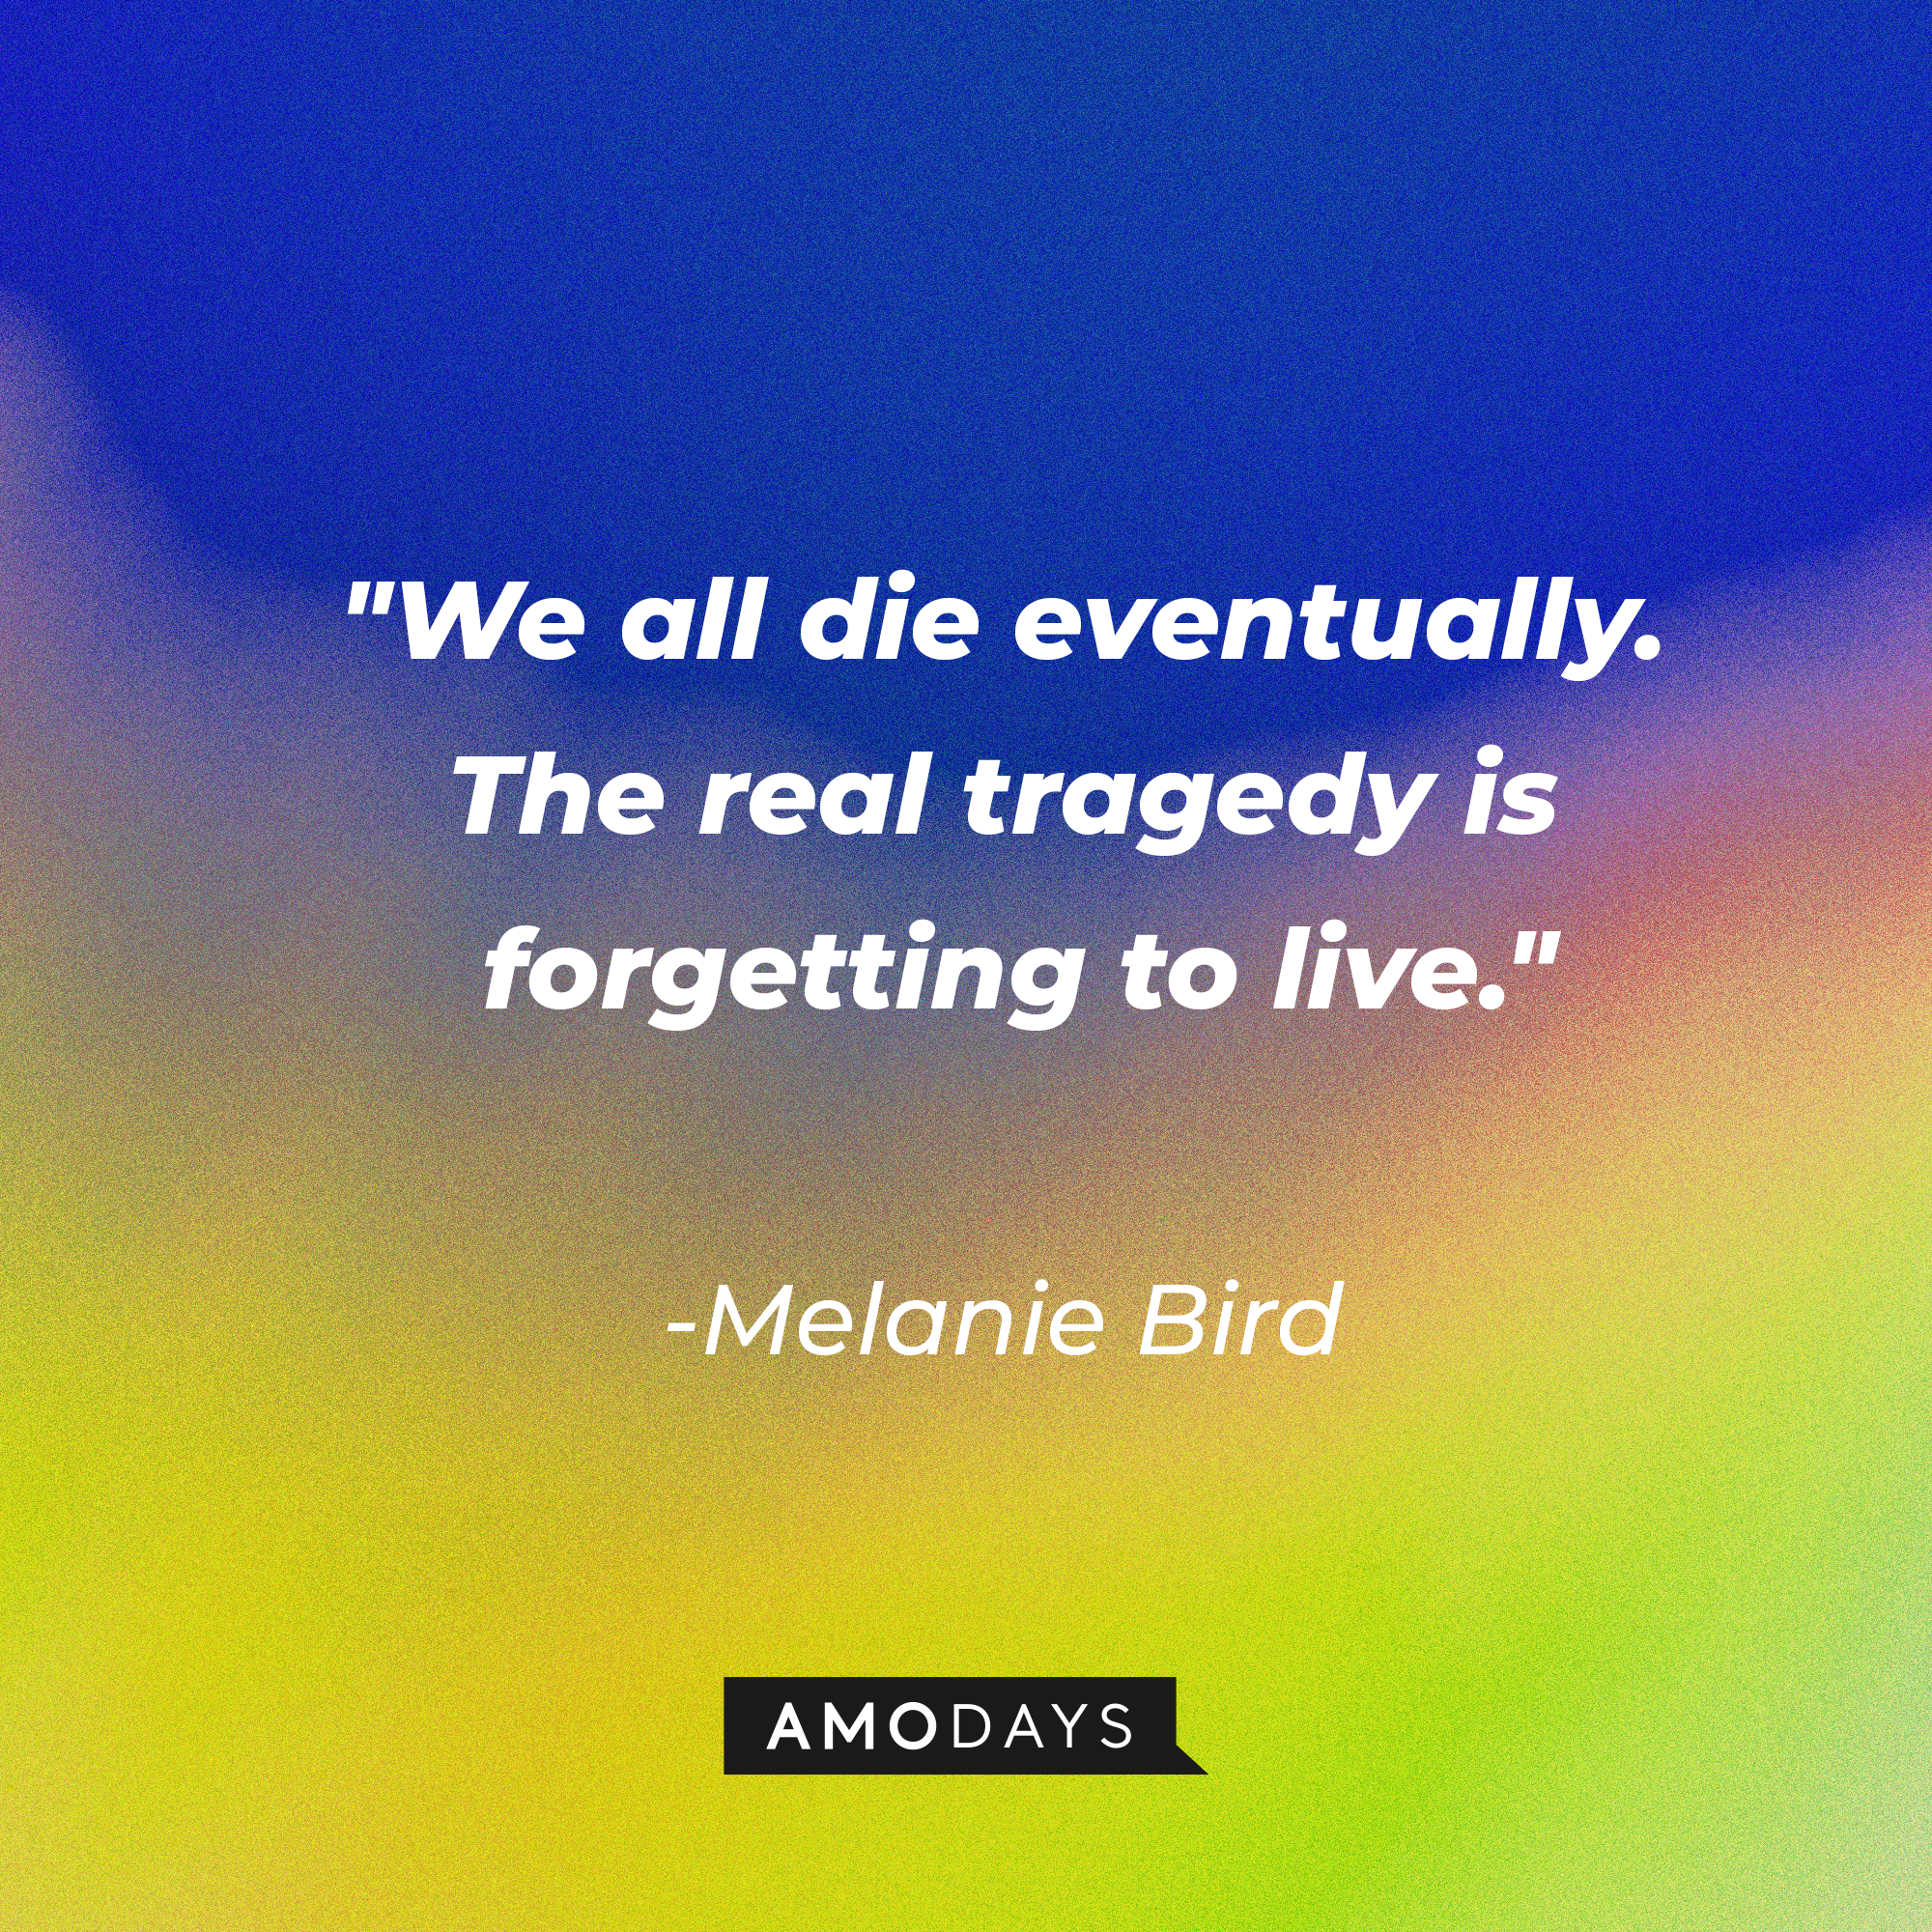 Melanie Bird's quote: "We all die eventually. The real tragedy is forgetting to live." | Image: AmoDays